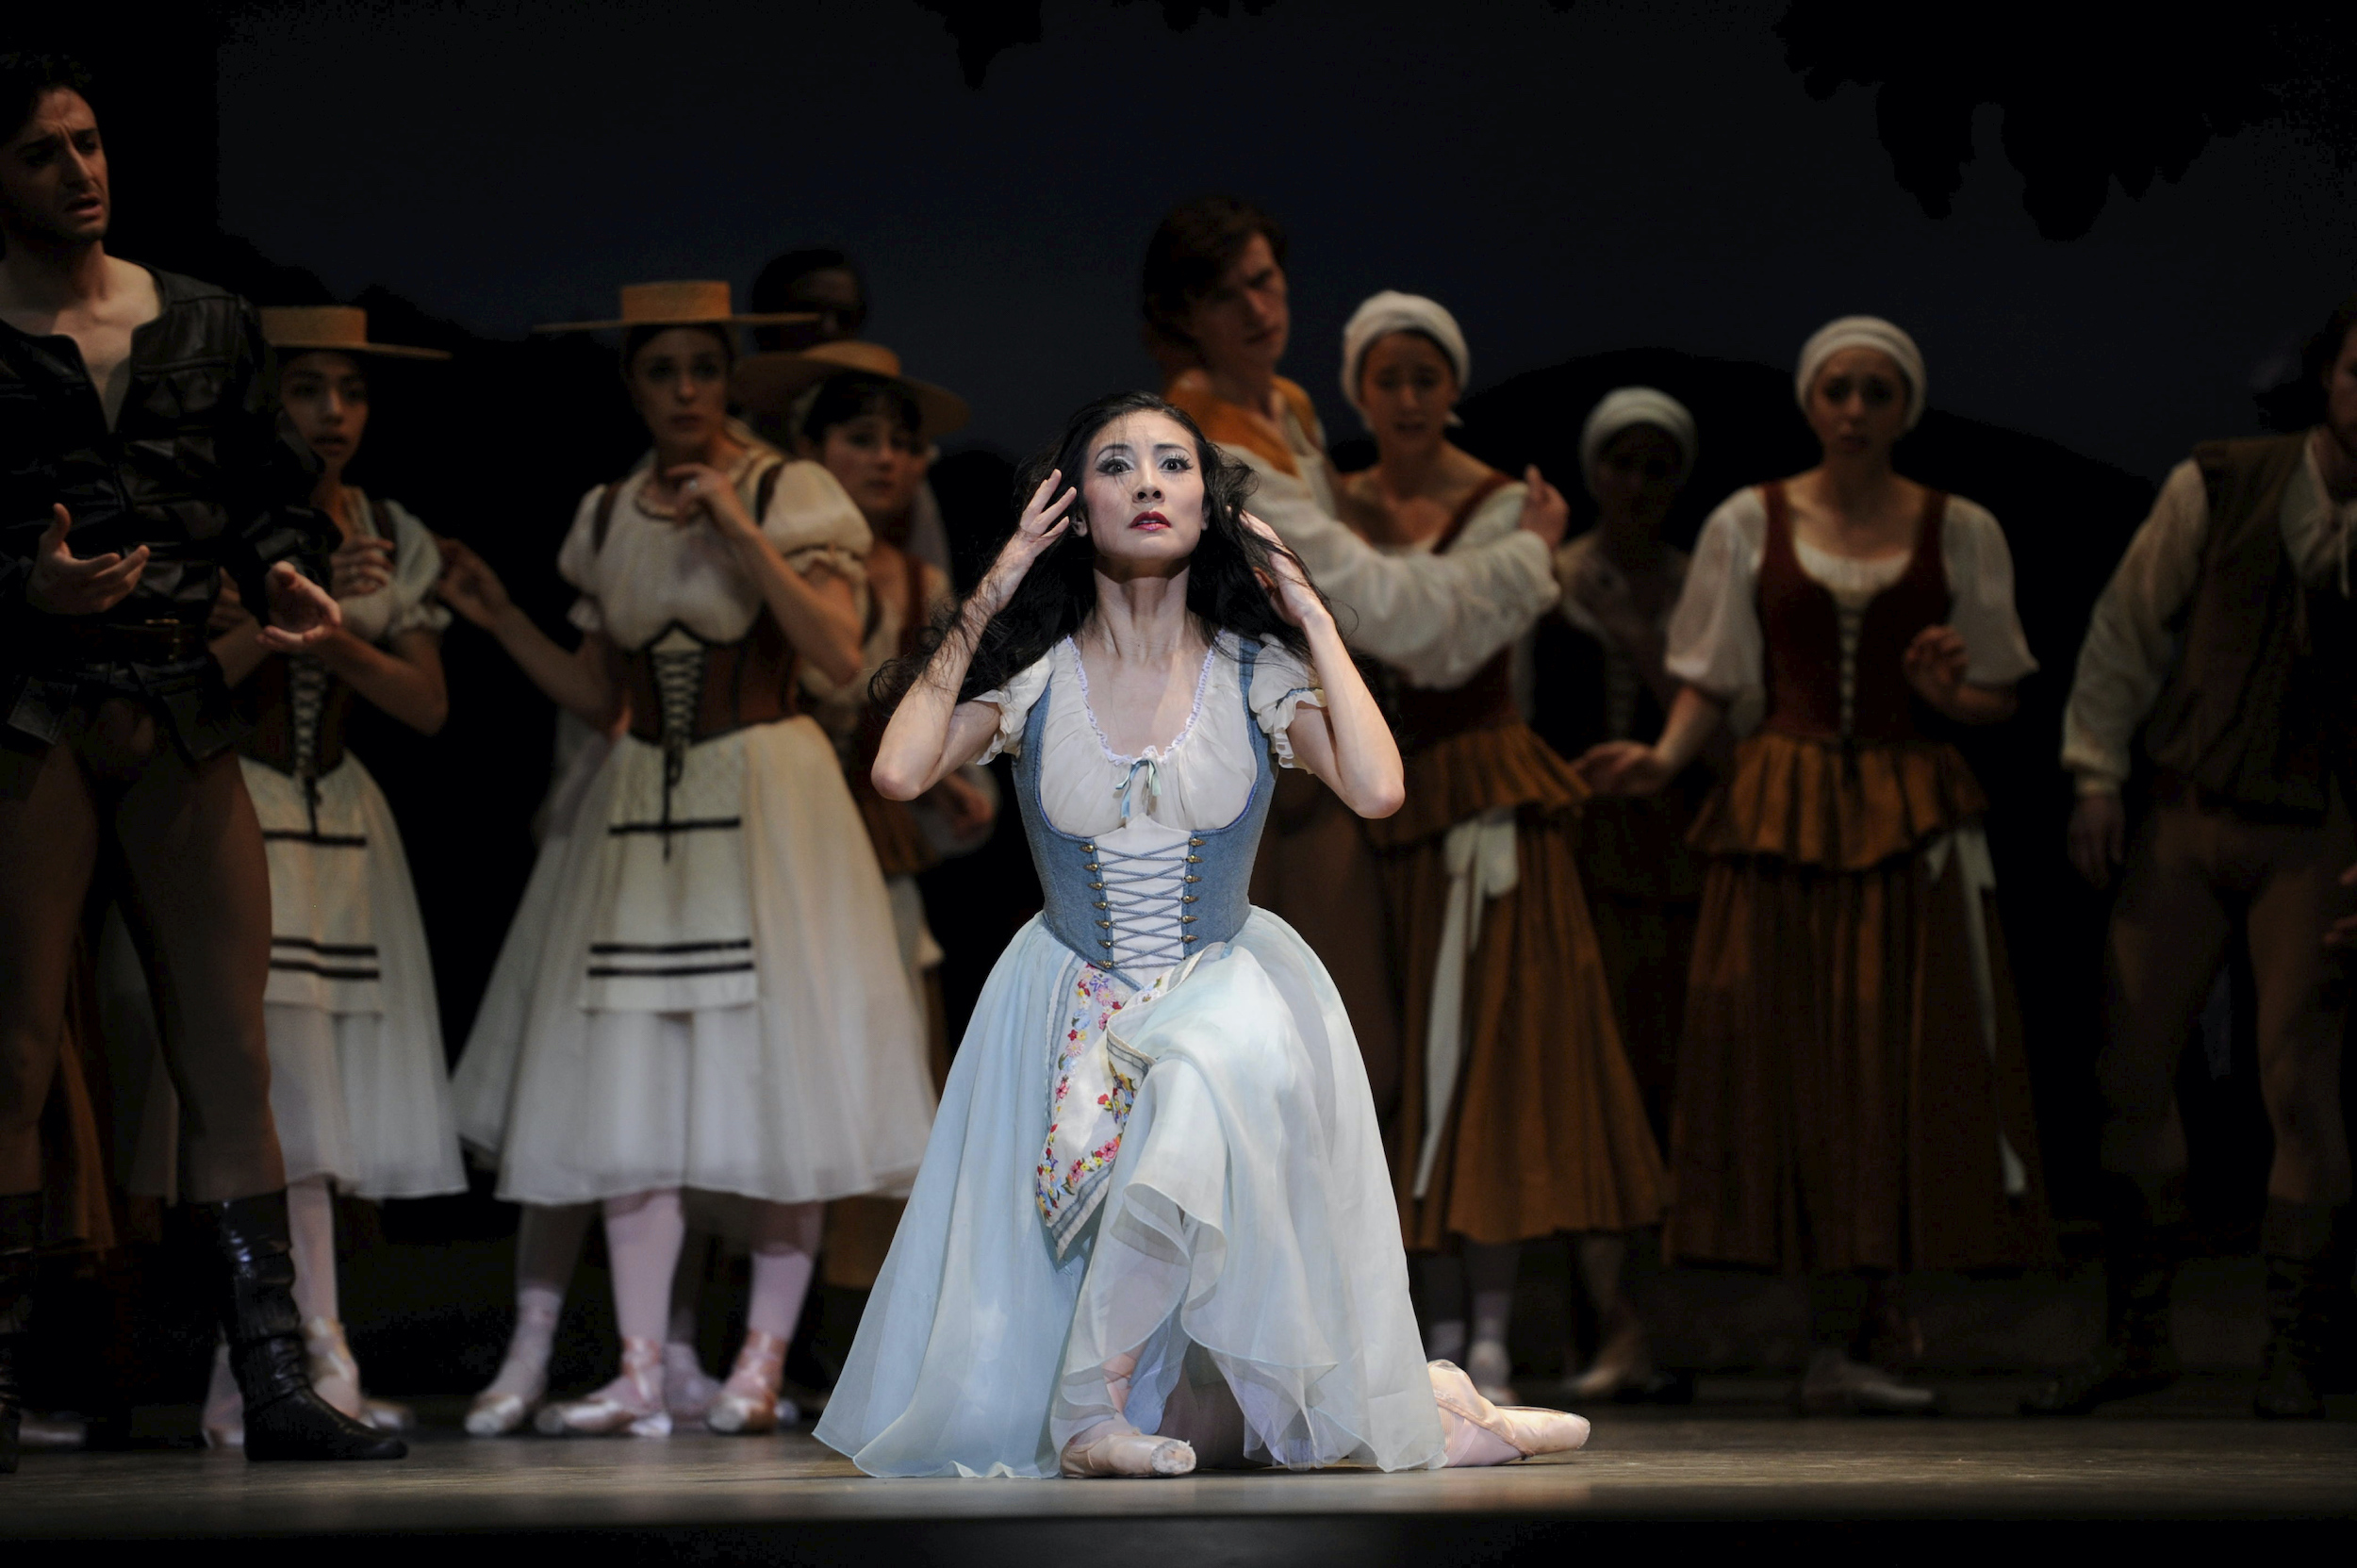 During a performance of Giselle, Yuan Yuan Tan, wearing a blue and white peasant dress, kneels down and touches her face. She looks out into the distance, her long black hairdown and messy. A large corps of male and female dancers in peasant costumes stand behind her, watching with concerned looks on their faces.